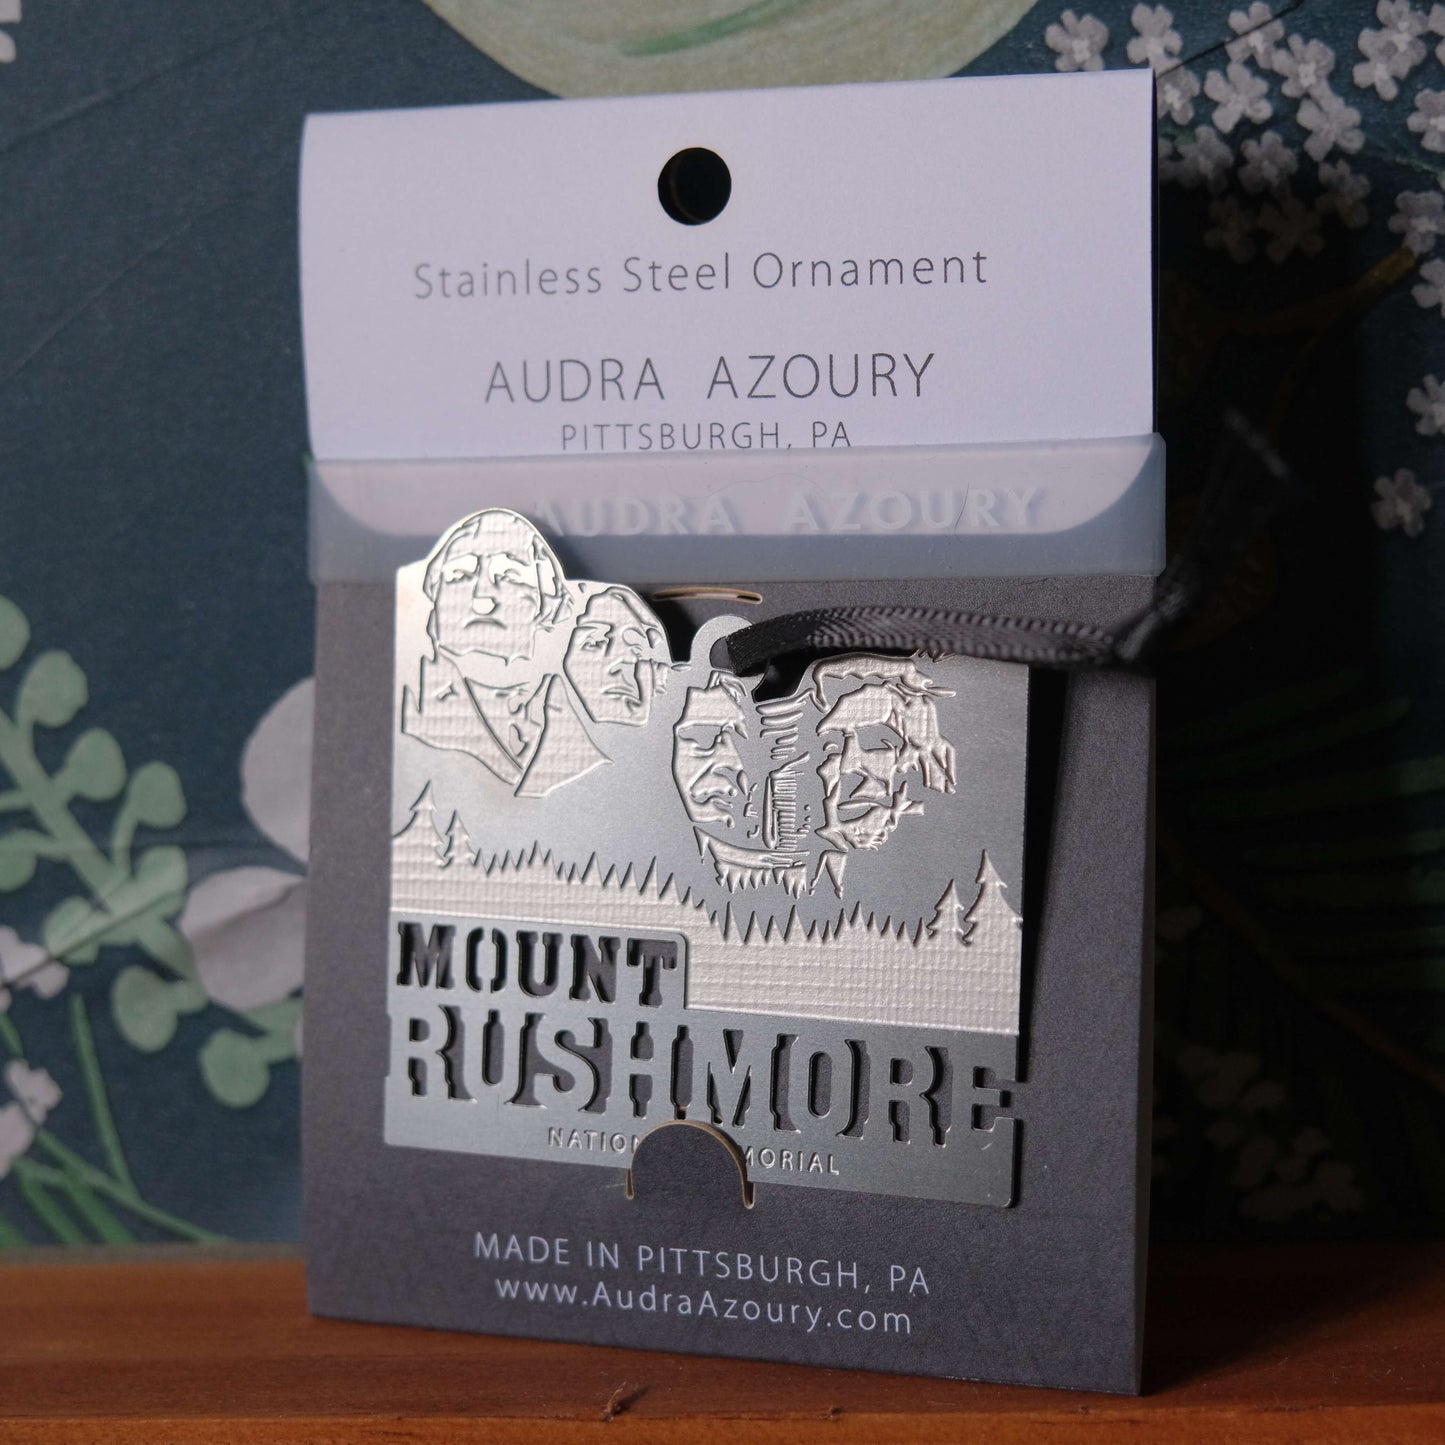 Mount Rushmore National Monument Ornament by Audra Azoury